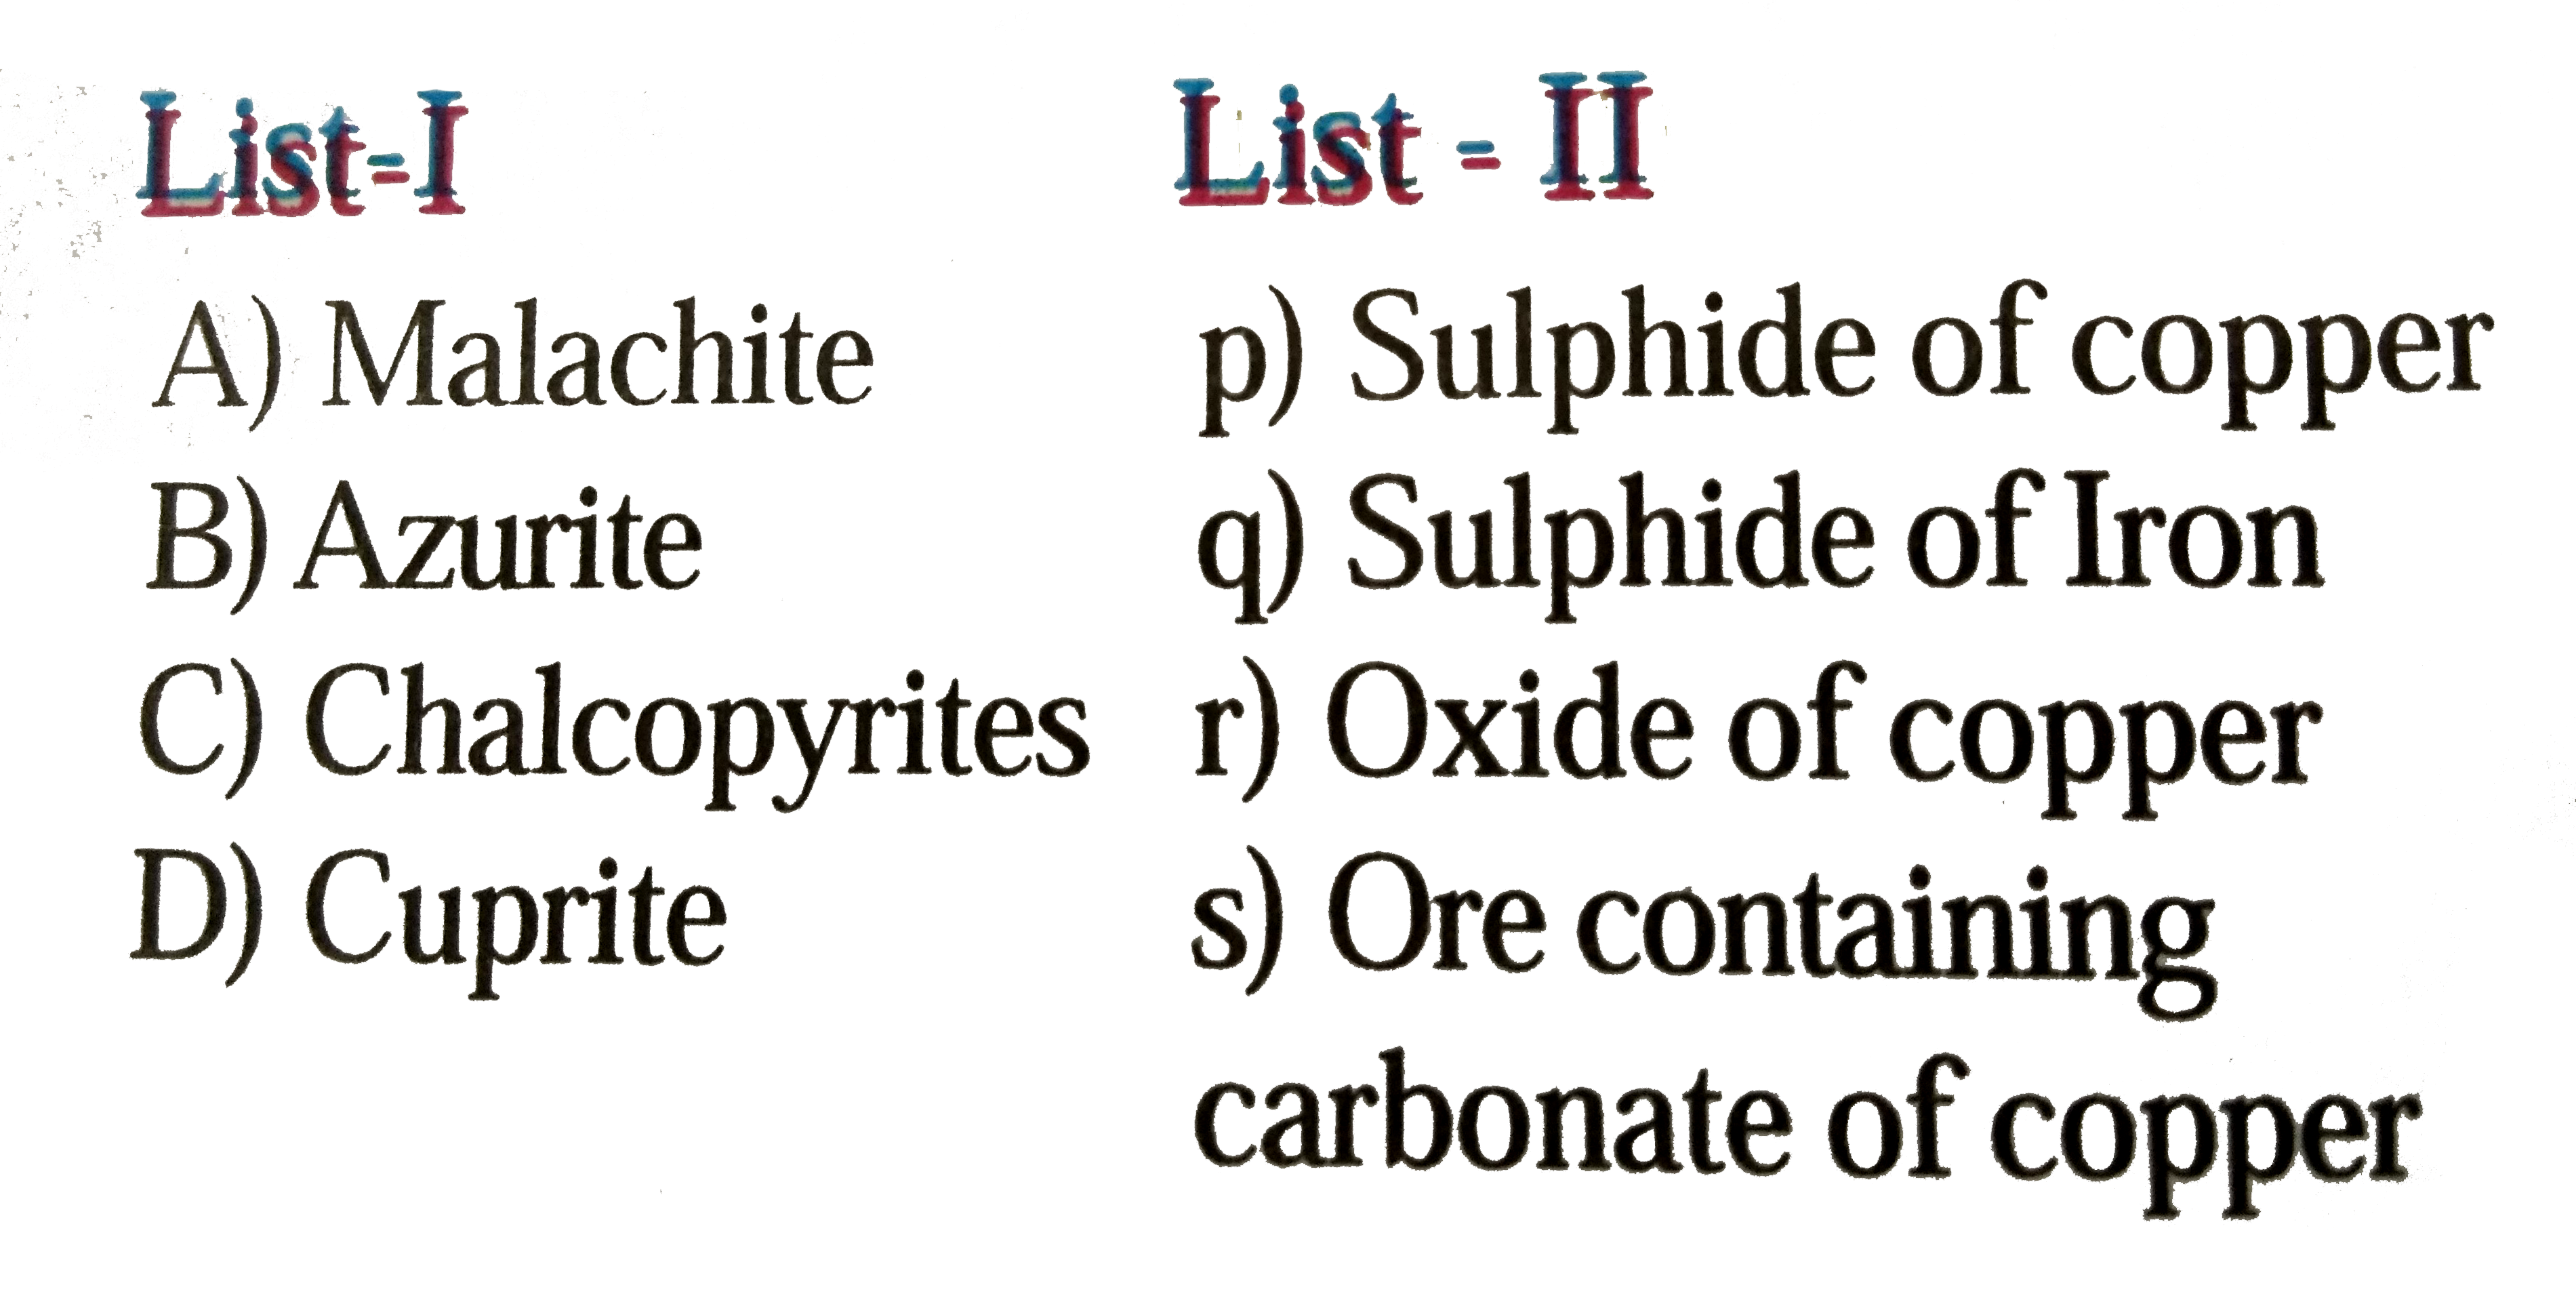 Match the ores of List-I with their composition in List-II